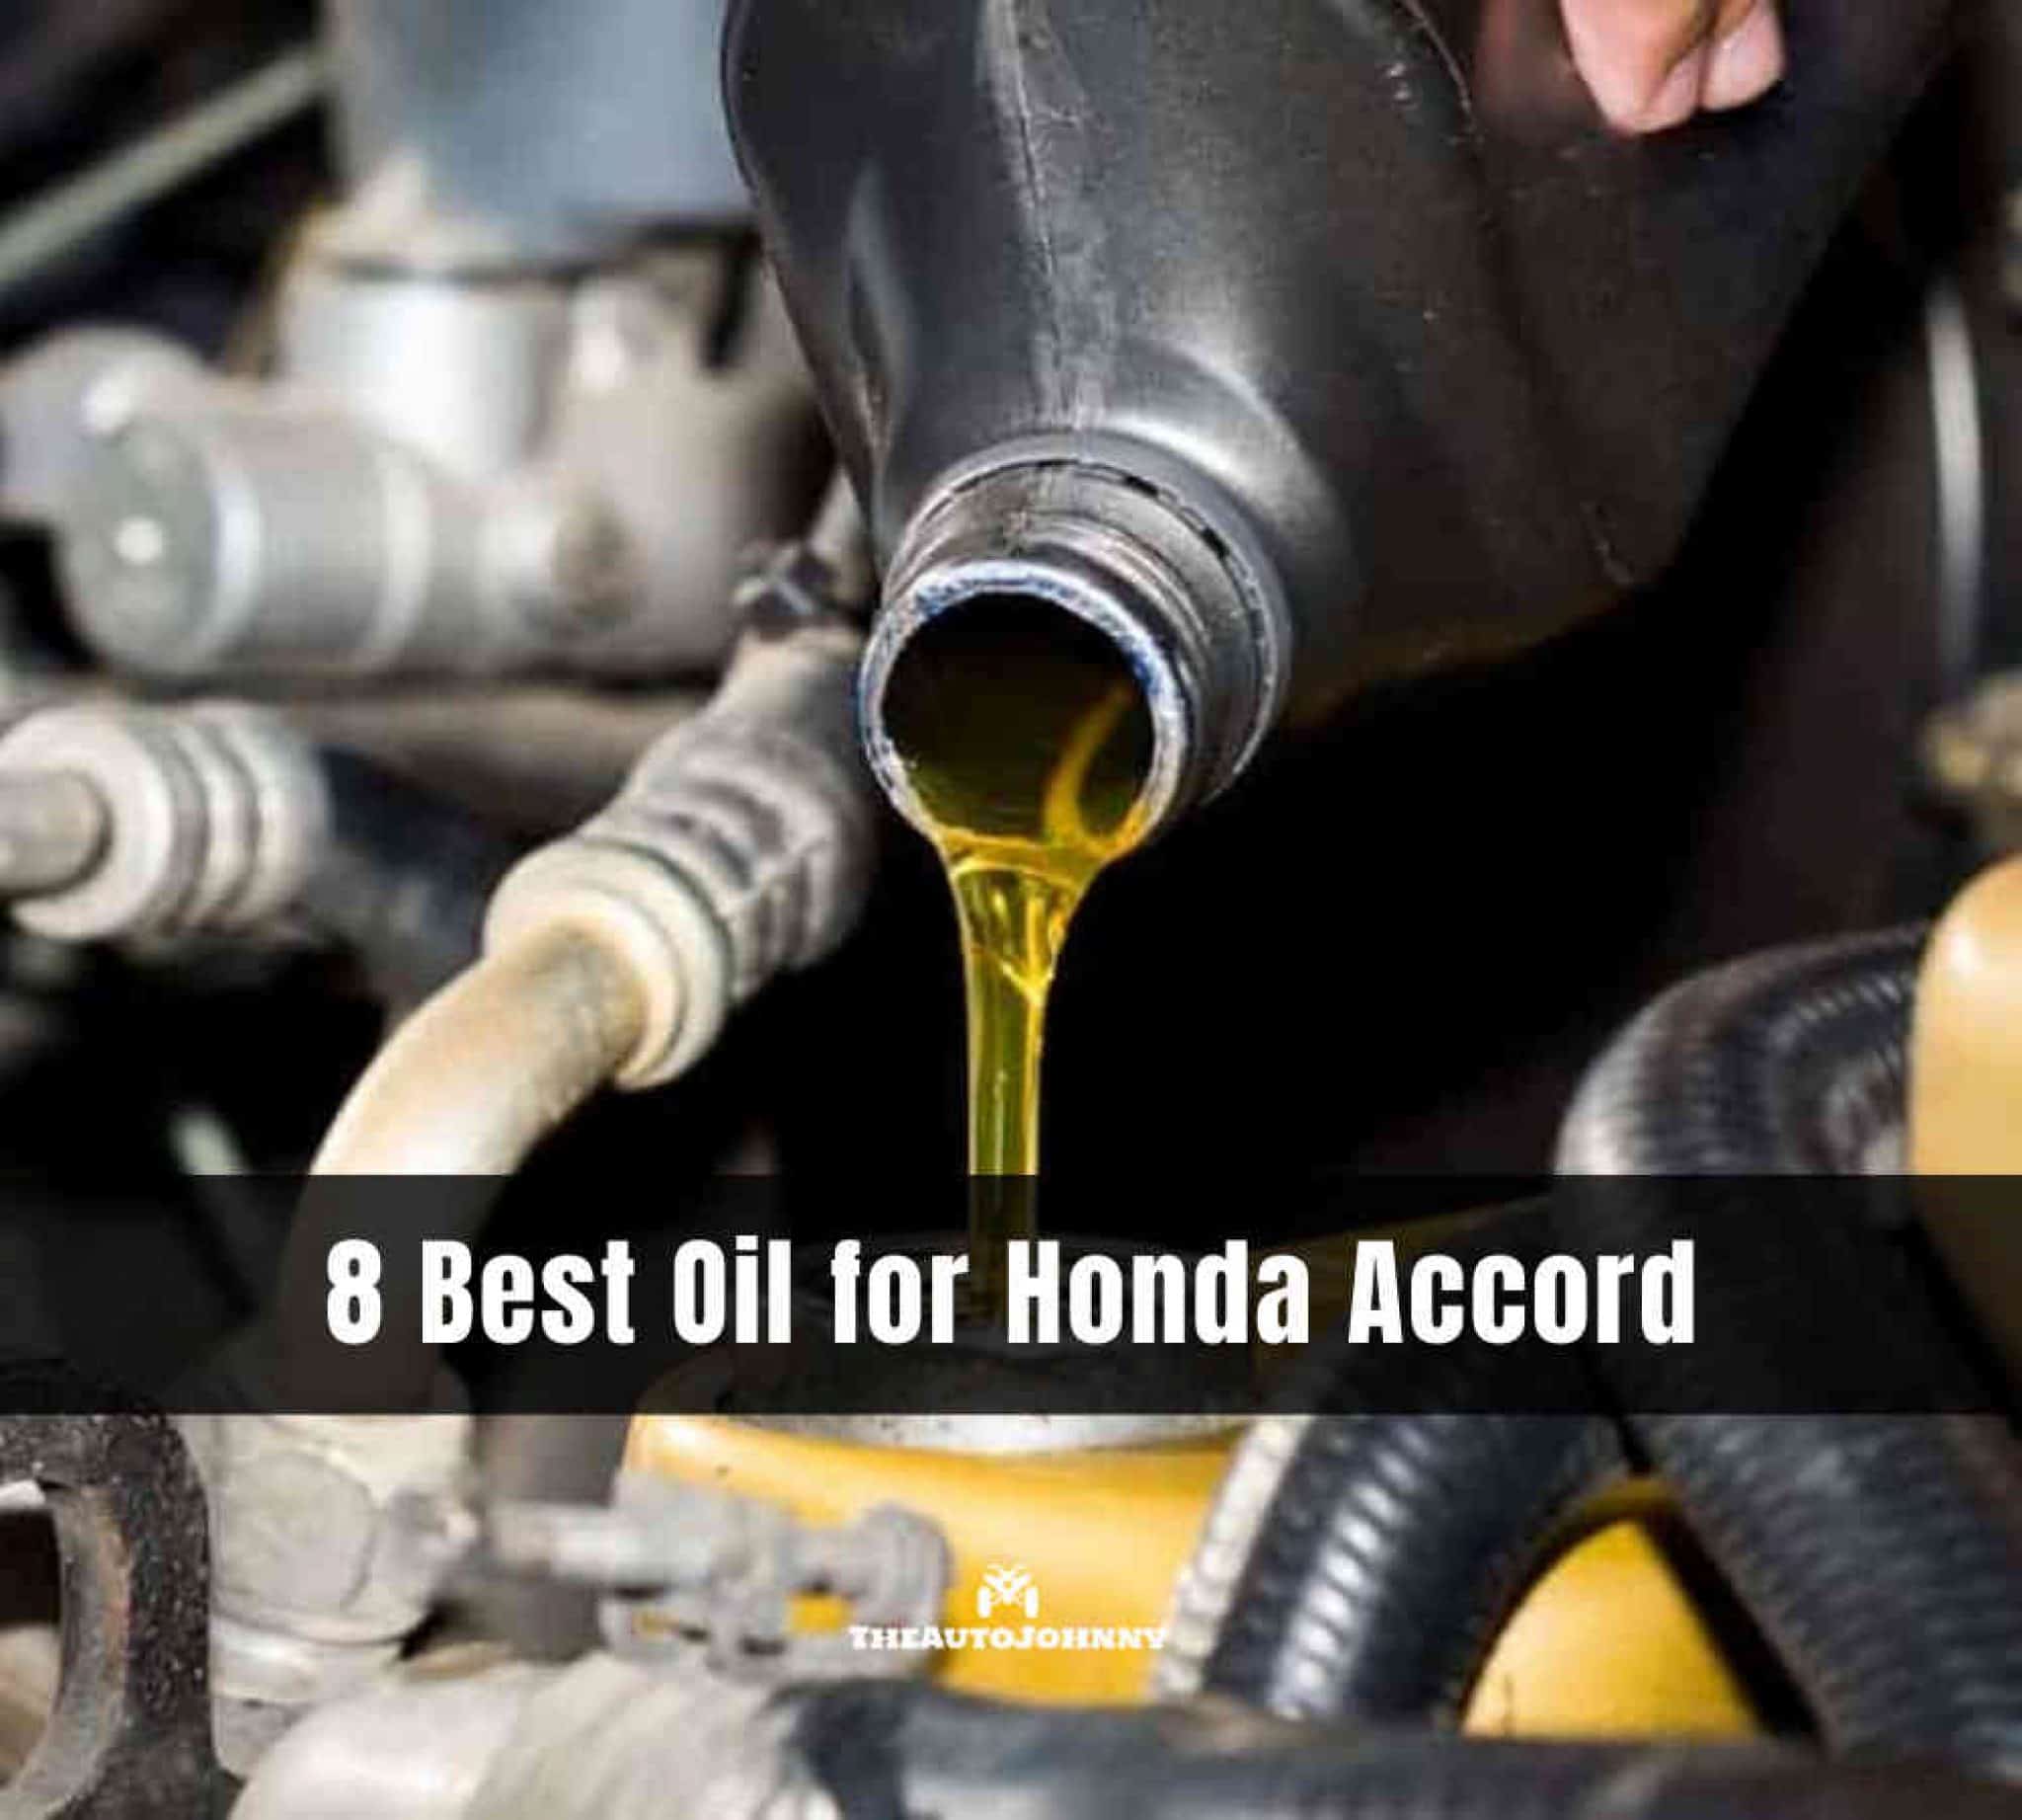 8 Best Oil for Honda Accord [Reviews & Buying Guide]